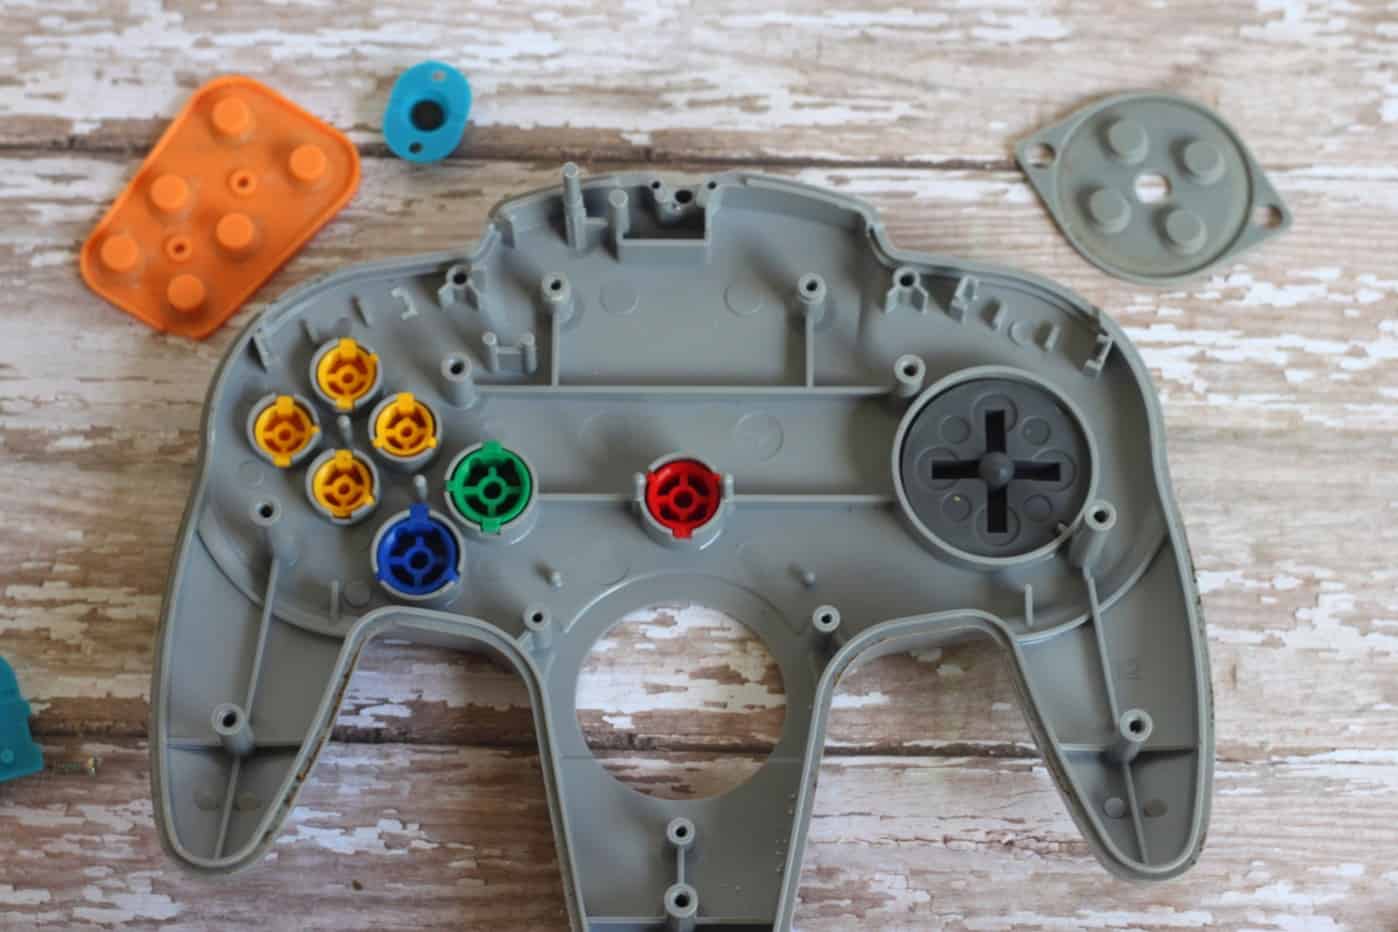 Nintendo 64 controller with the parts removed